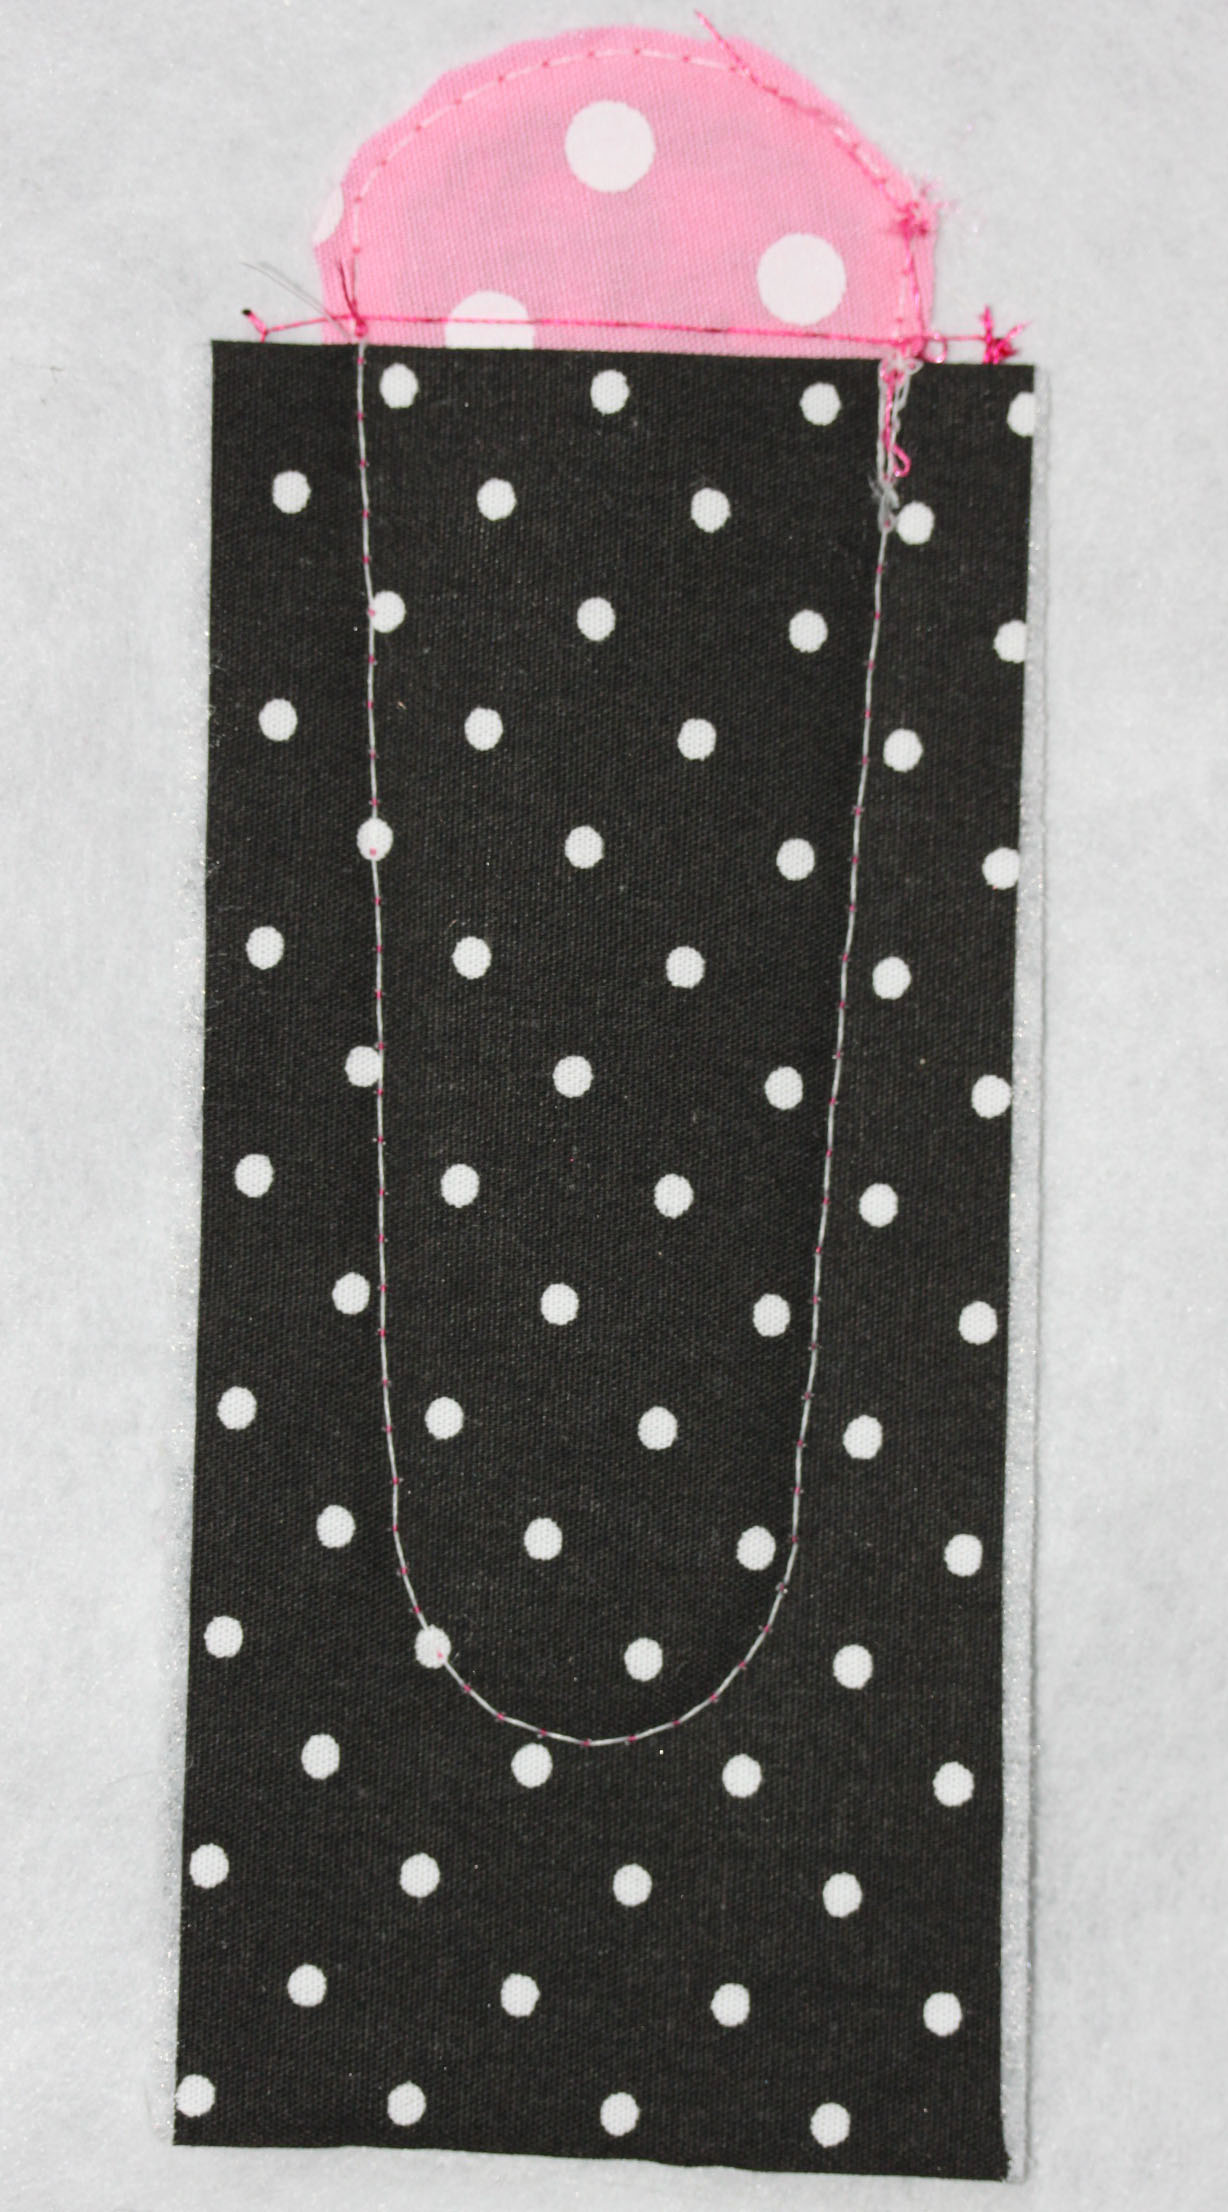 Polka Dot Fabric with Outline Stitch